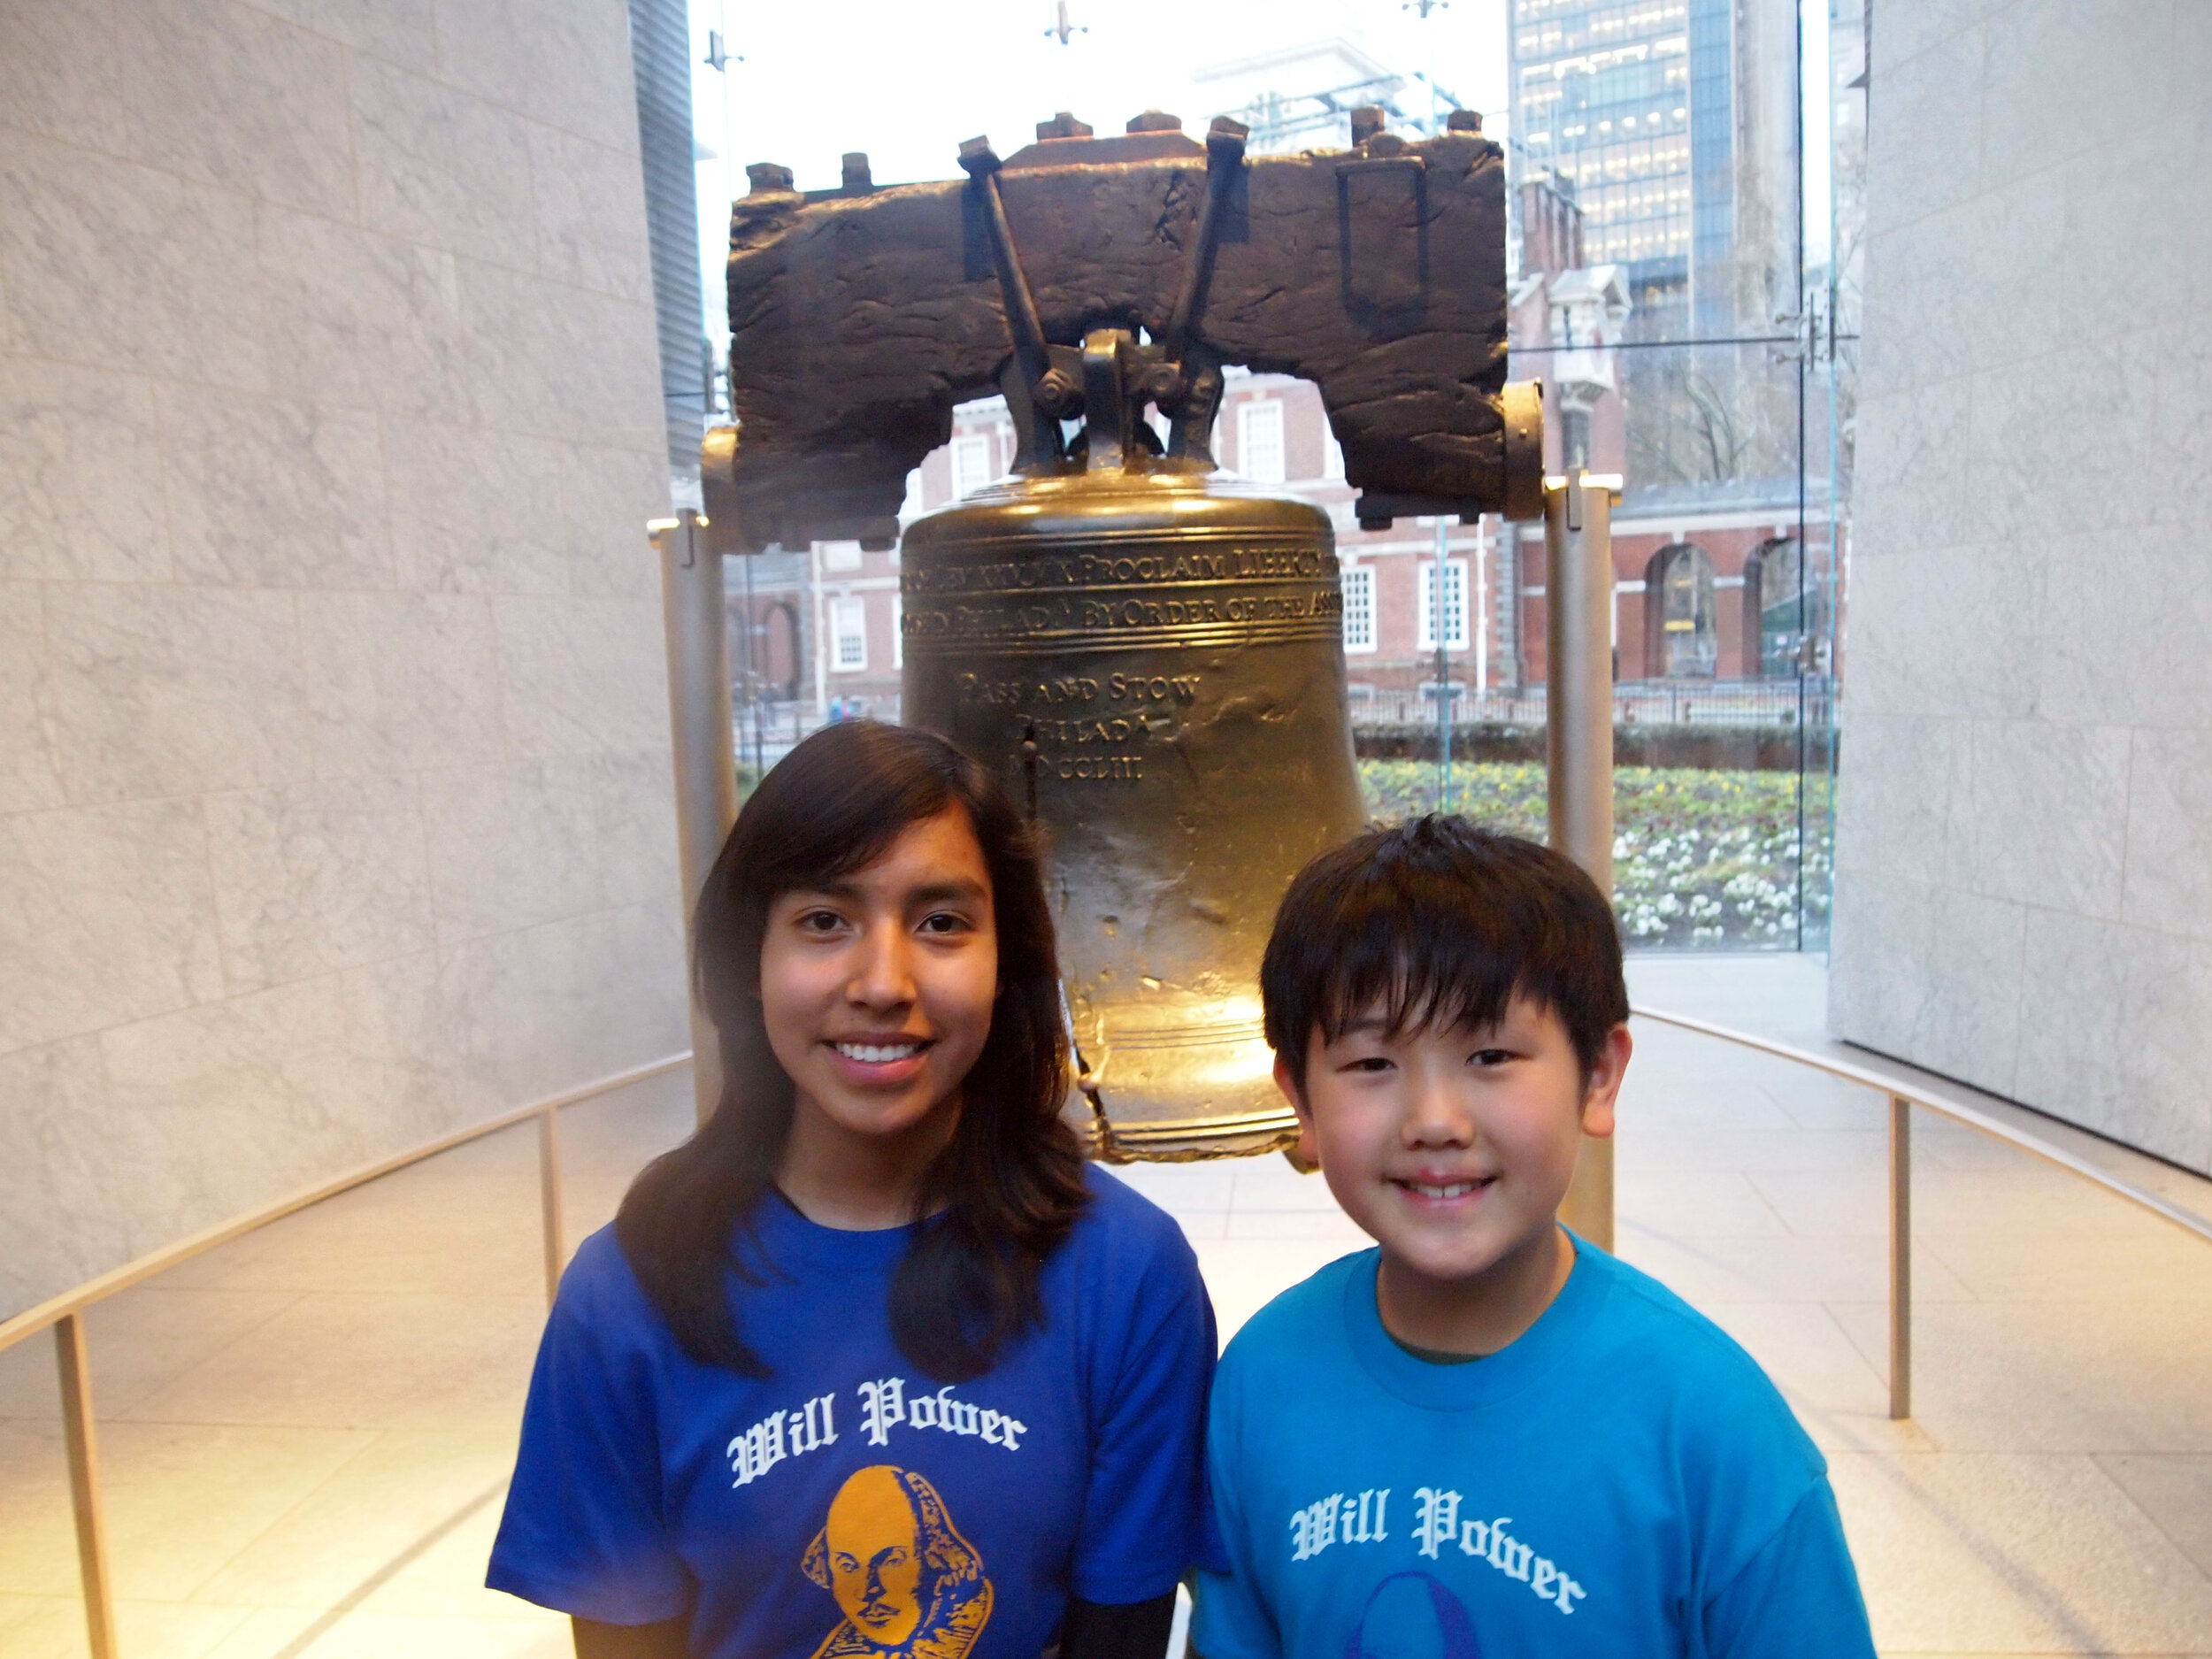  The Liberty Bell - Let Freedom Ring!!! 